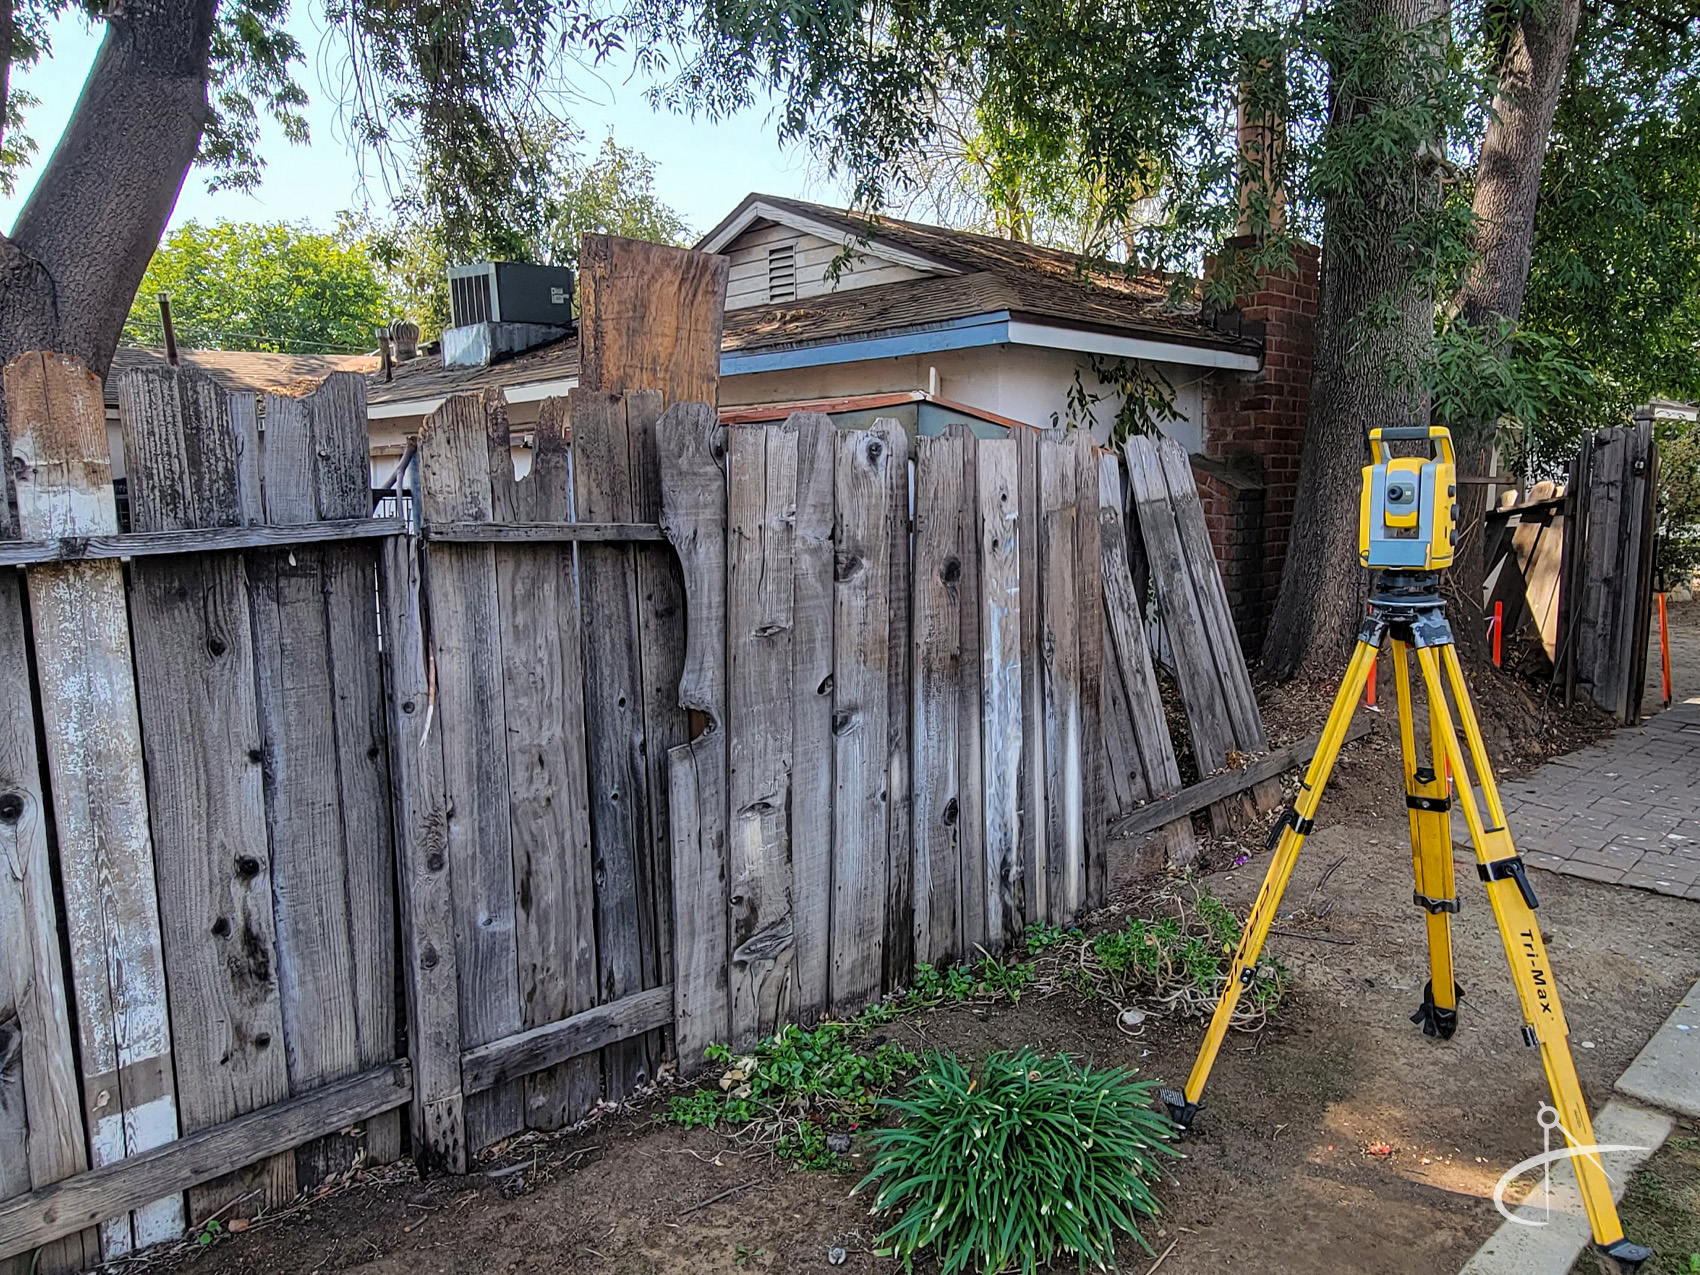 Survey total station next to an aging fence.